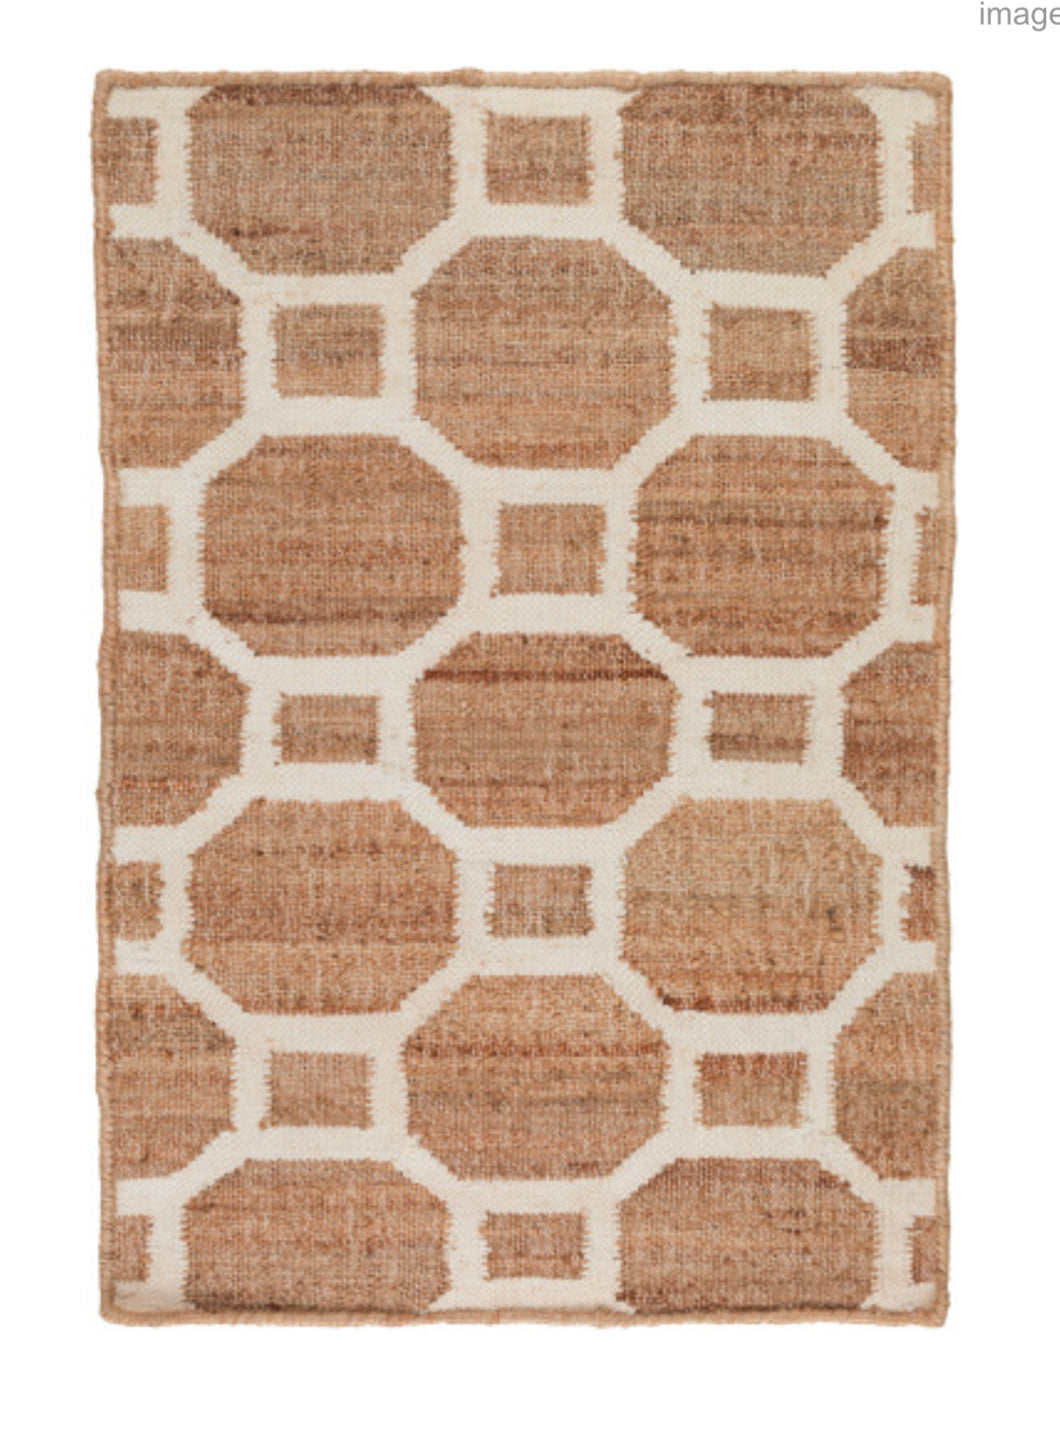 Natural Rattan with White trellis pattern rug - 5x7'6